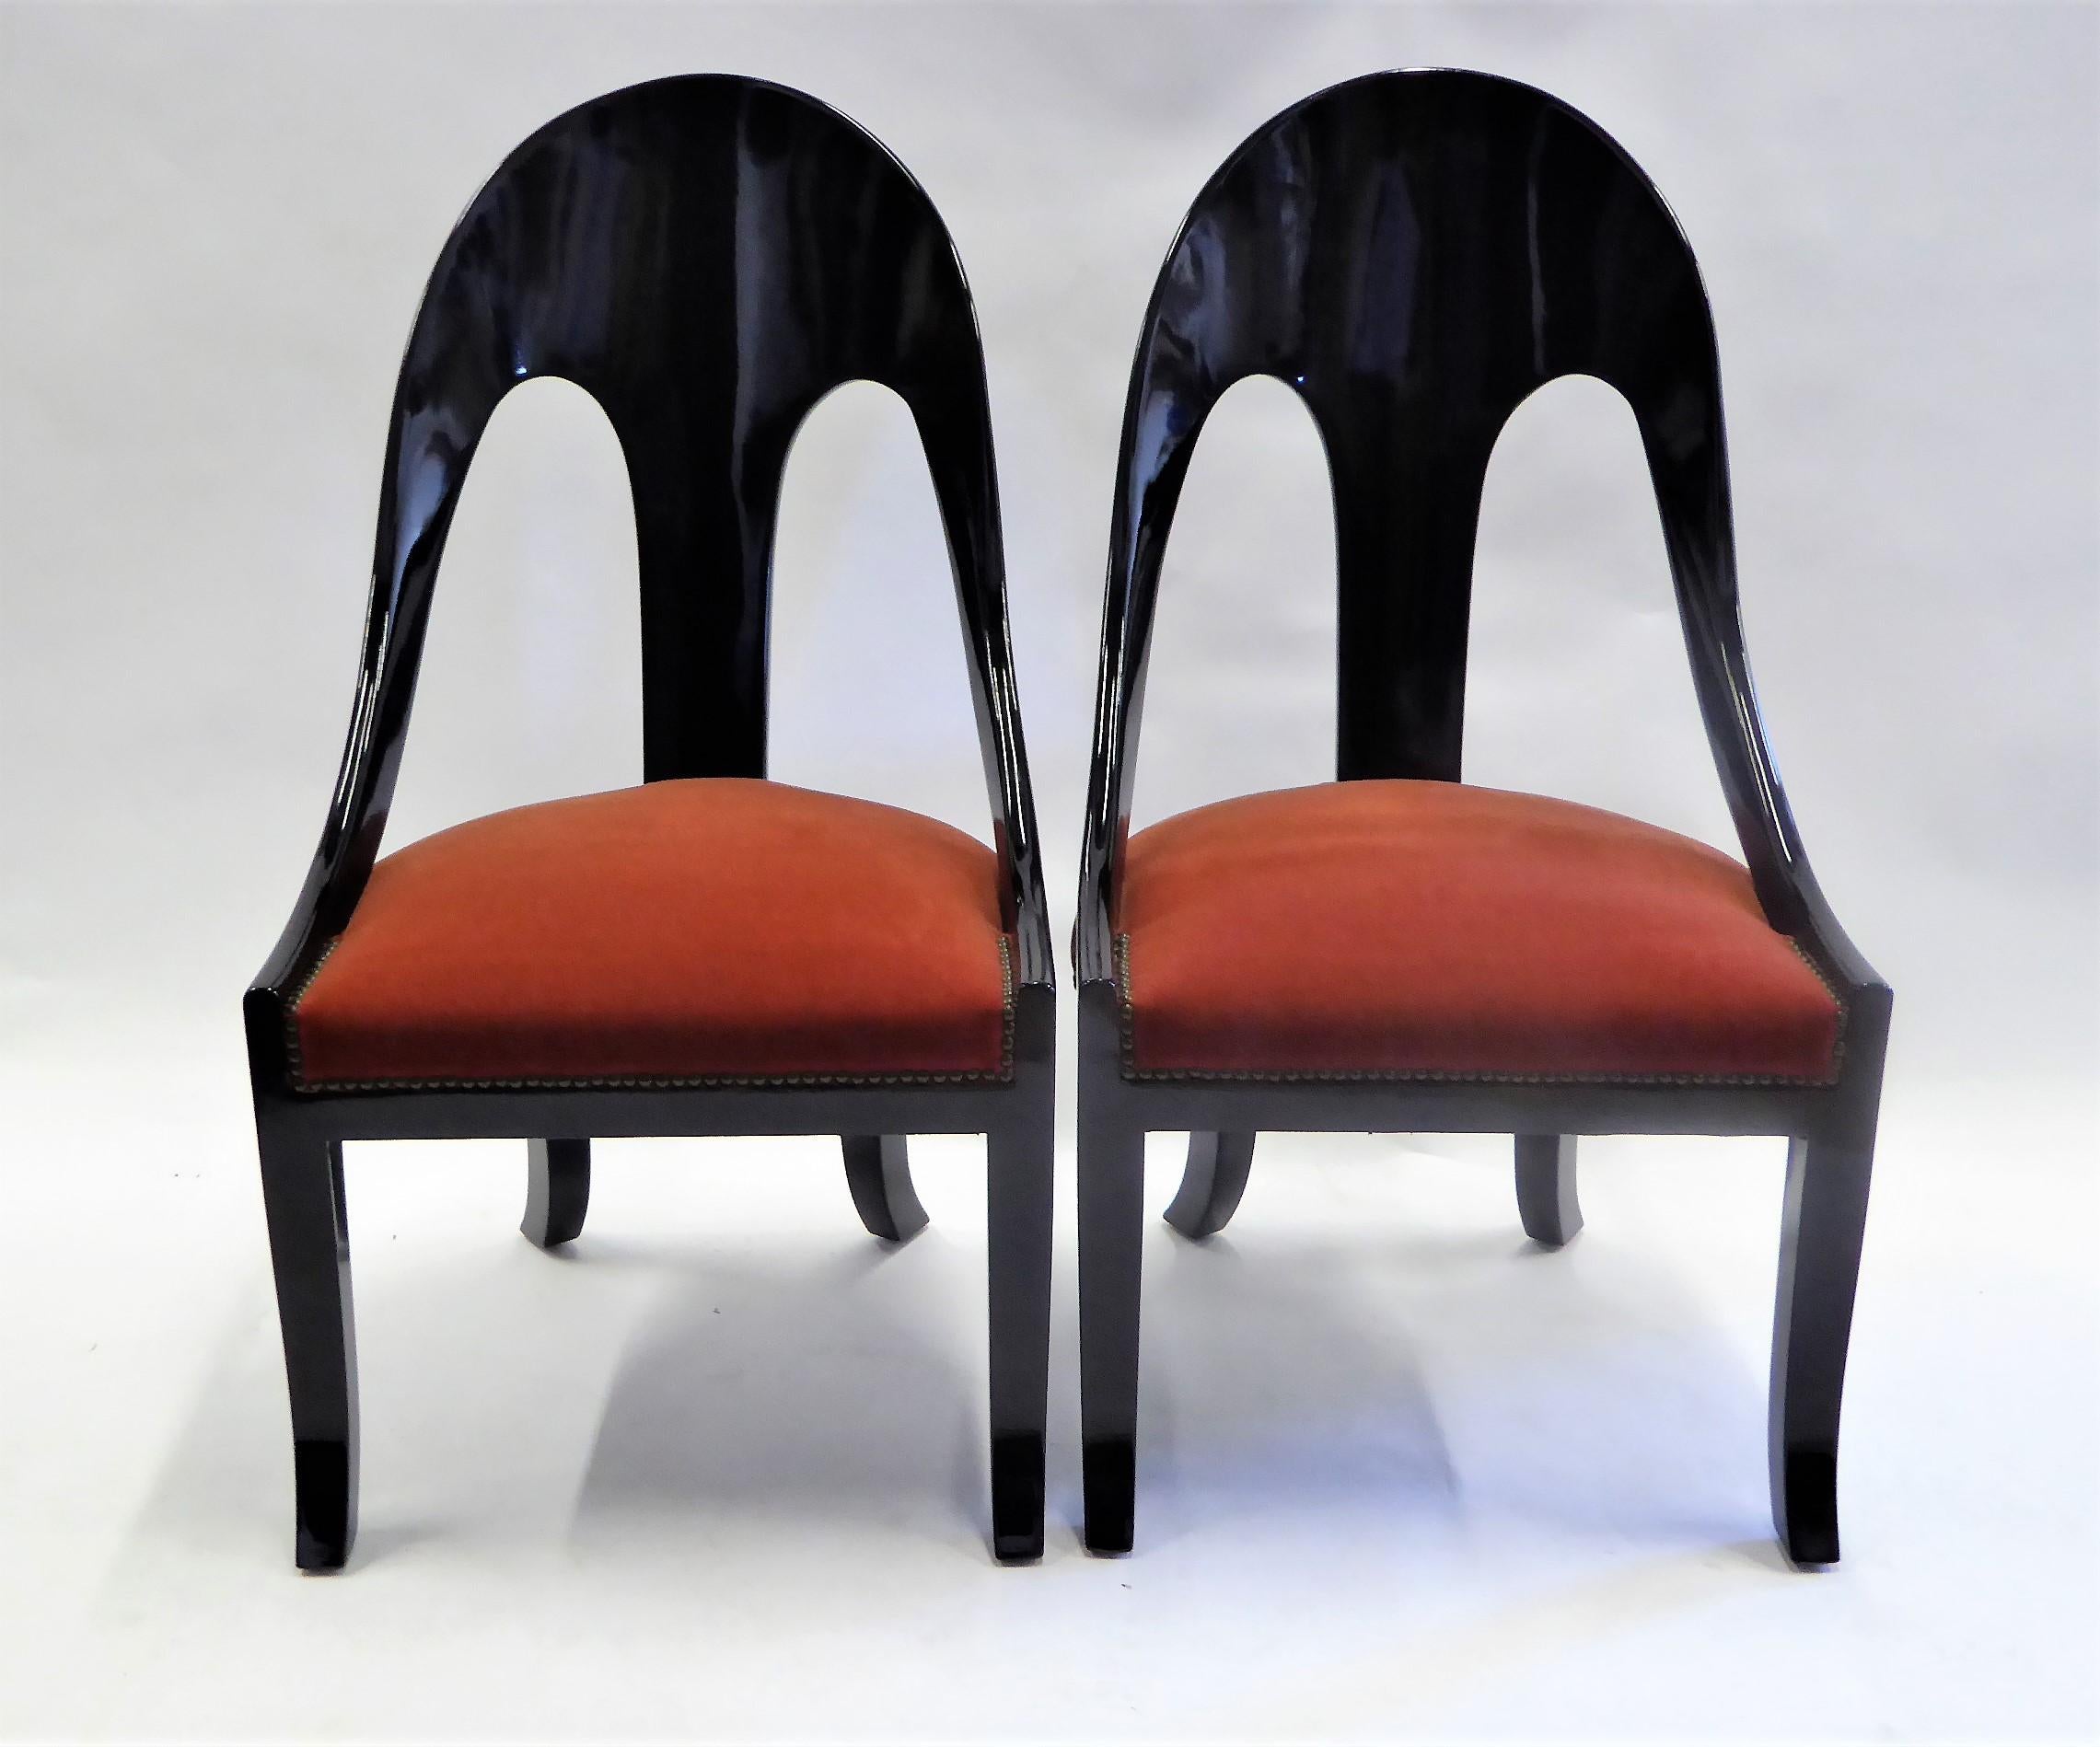 Period 1930s spoonback chairs with saber legs and a klismos bend, this pair of chairs are an elegant statement. Richly lacquered and with a deep burnt red Mohair velvet and nailhead upholstery, restored.
Measurements: 21 1/2 inches wide x 21 inches